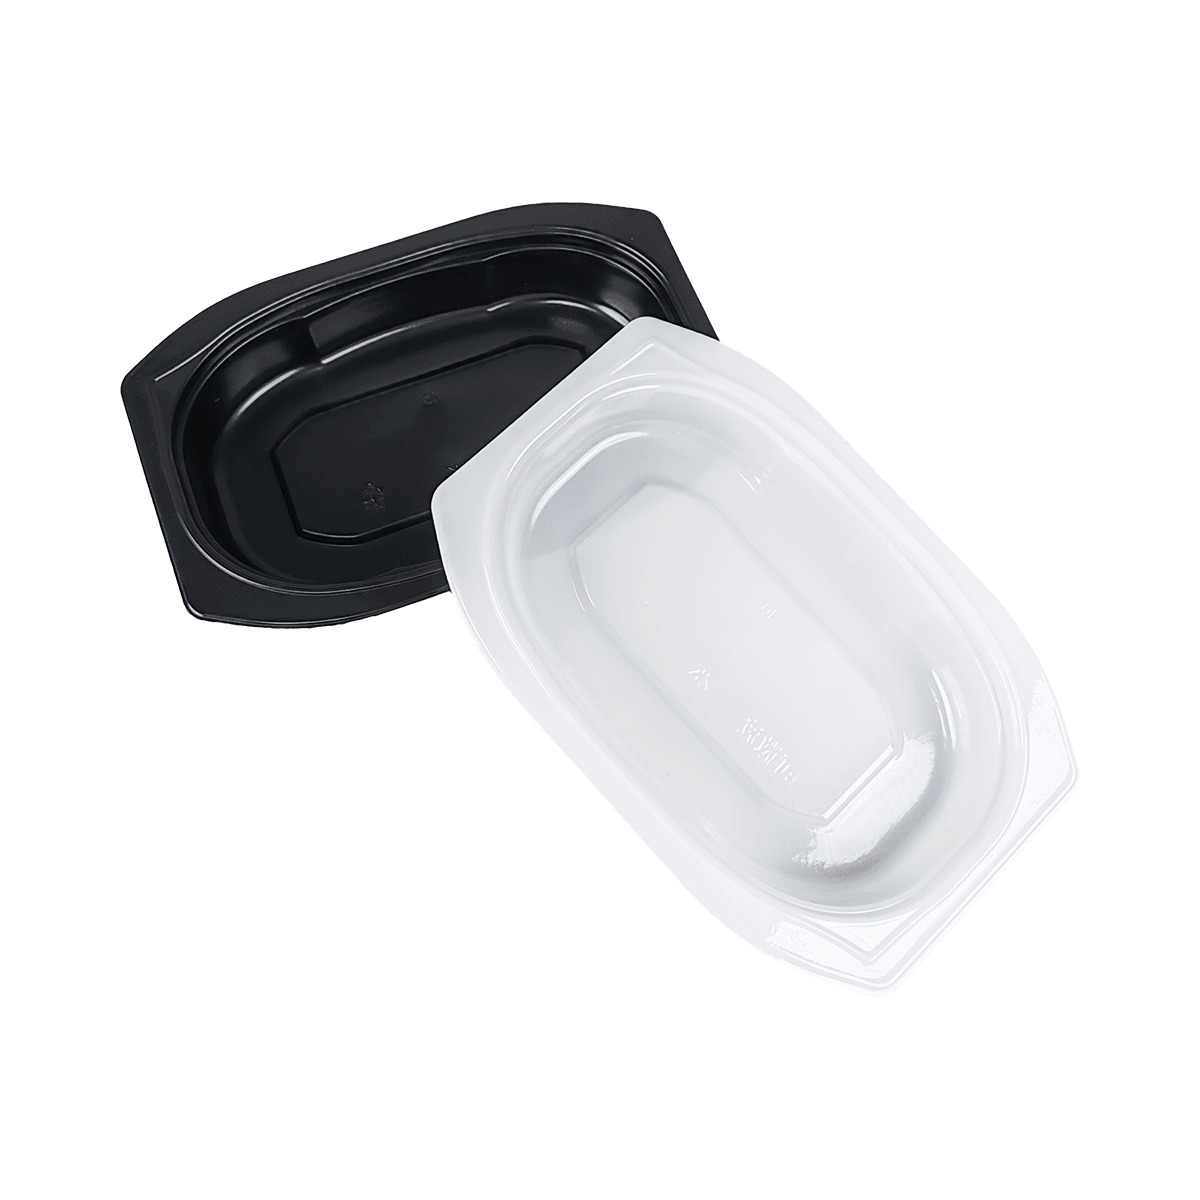 ZK-CPET-019 Robust And Versatile Reusable Black CPET Packaging Containers